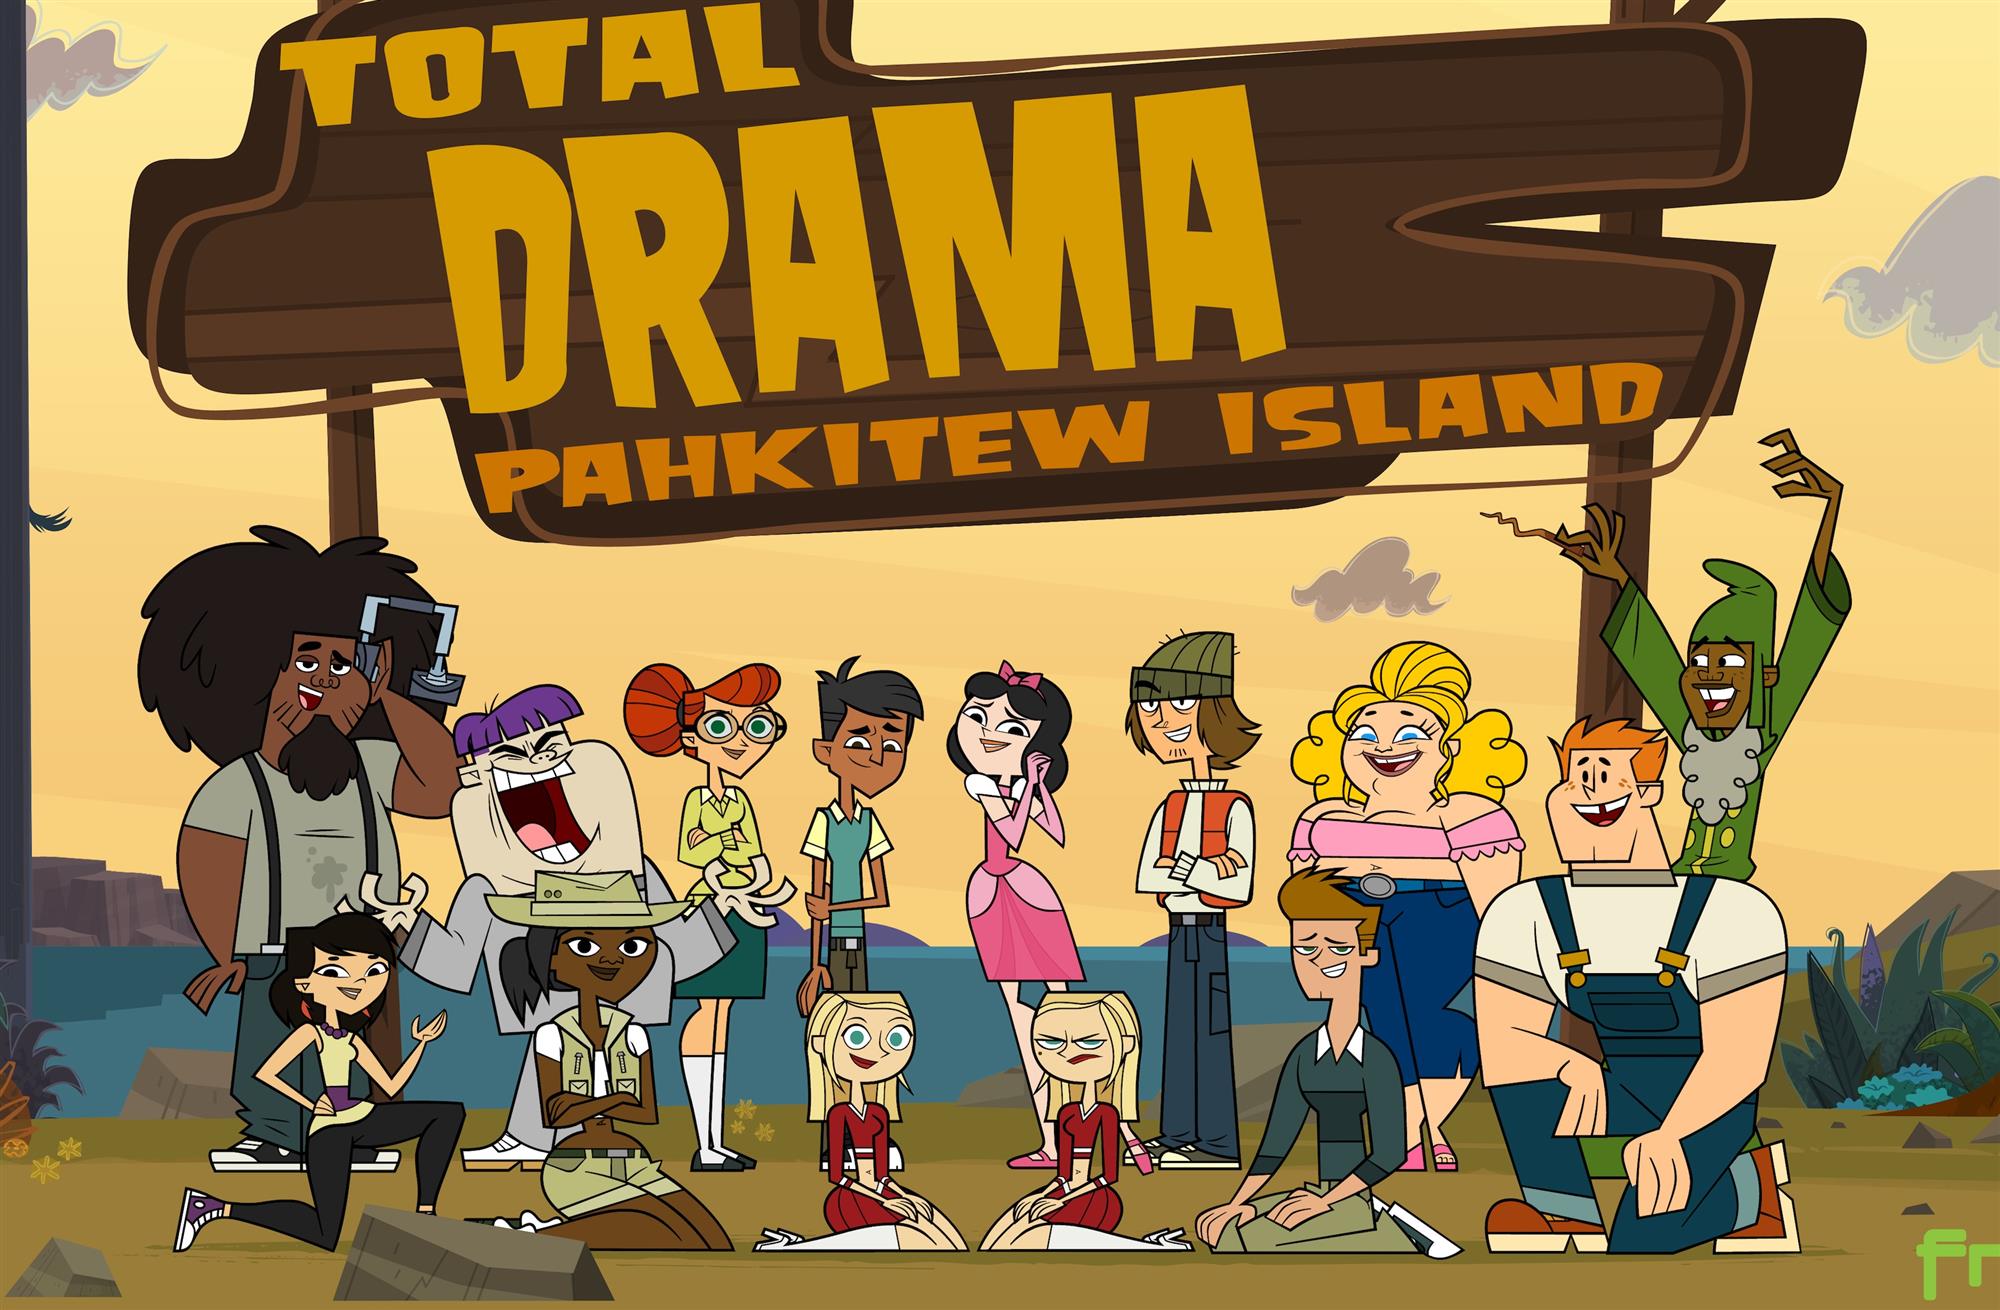 Total Drama Pahkitew Island Images Icons Wallpapers And Photos On | My ...